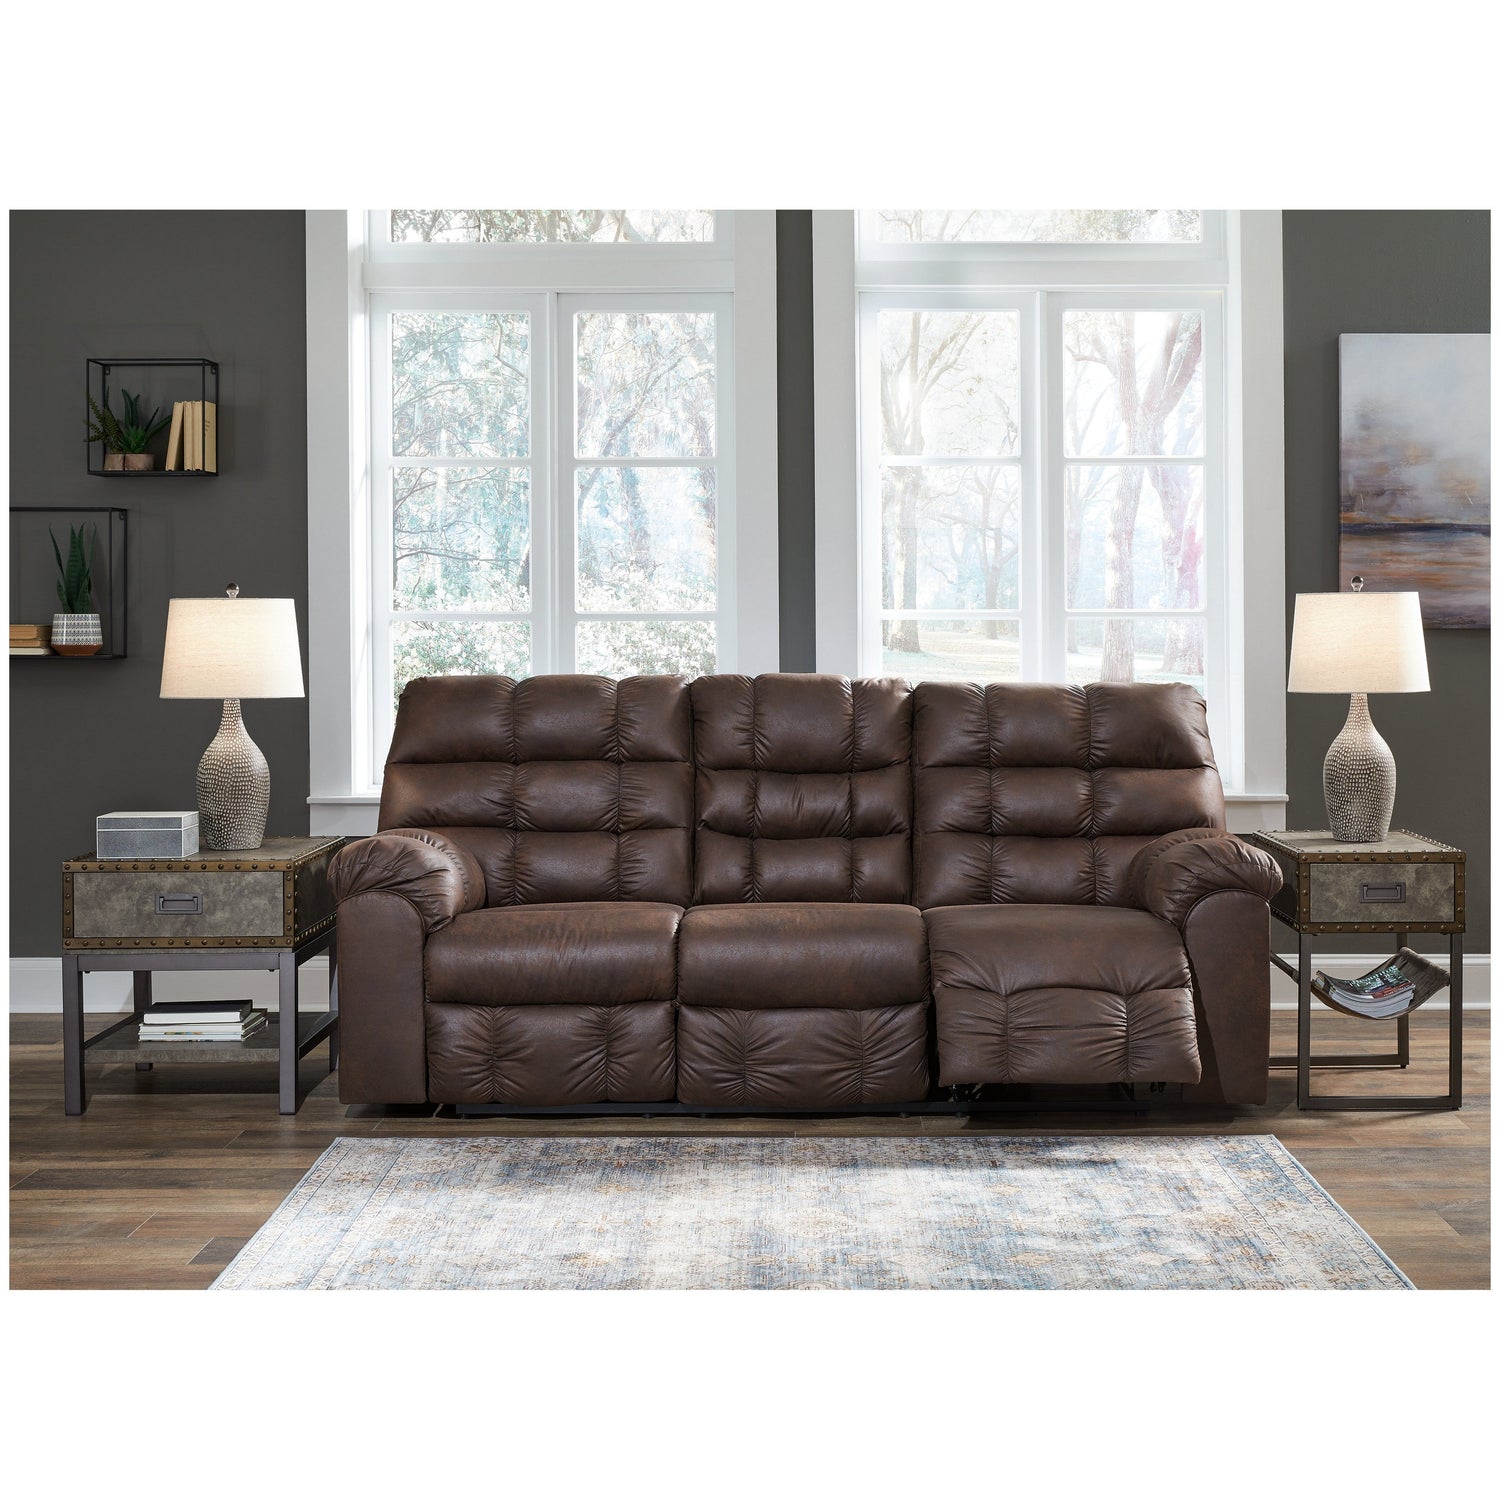 Derwin Reclining Sofa with Drop Down Table Ash-2840289